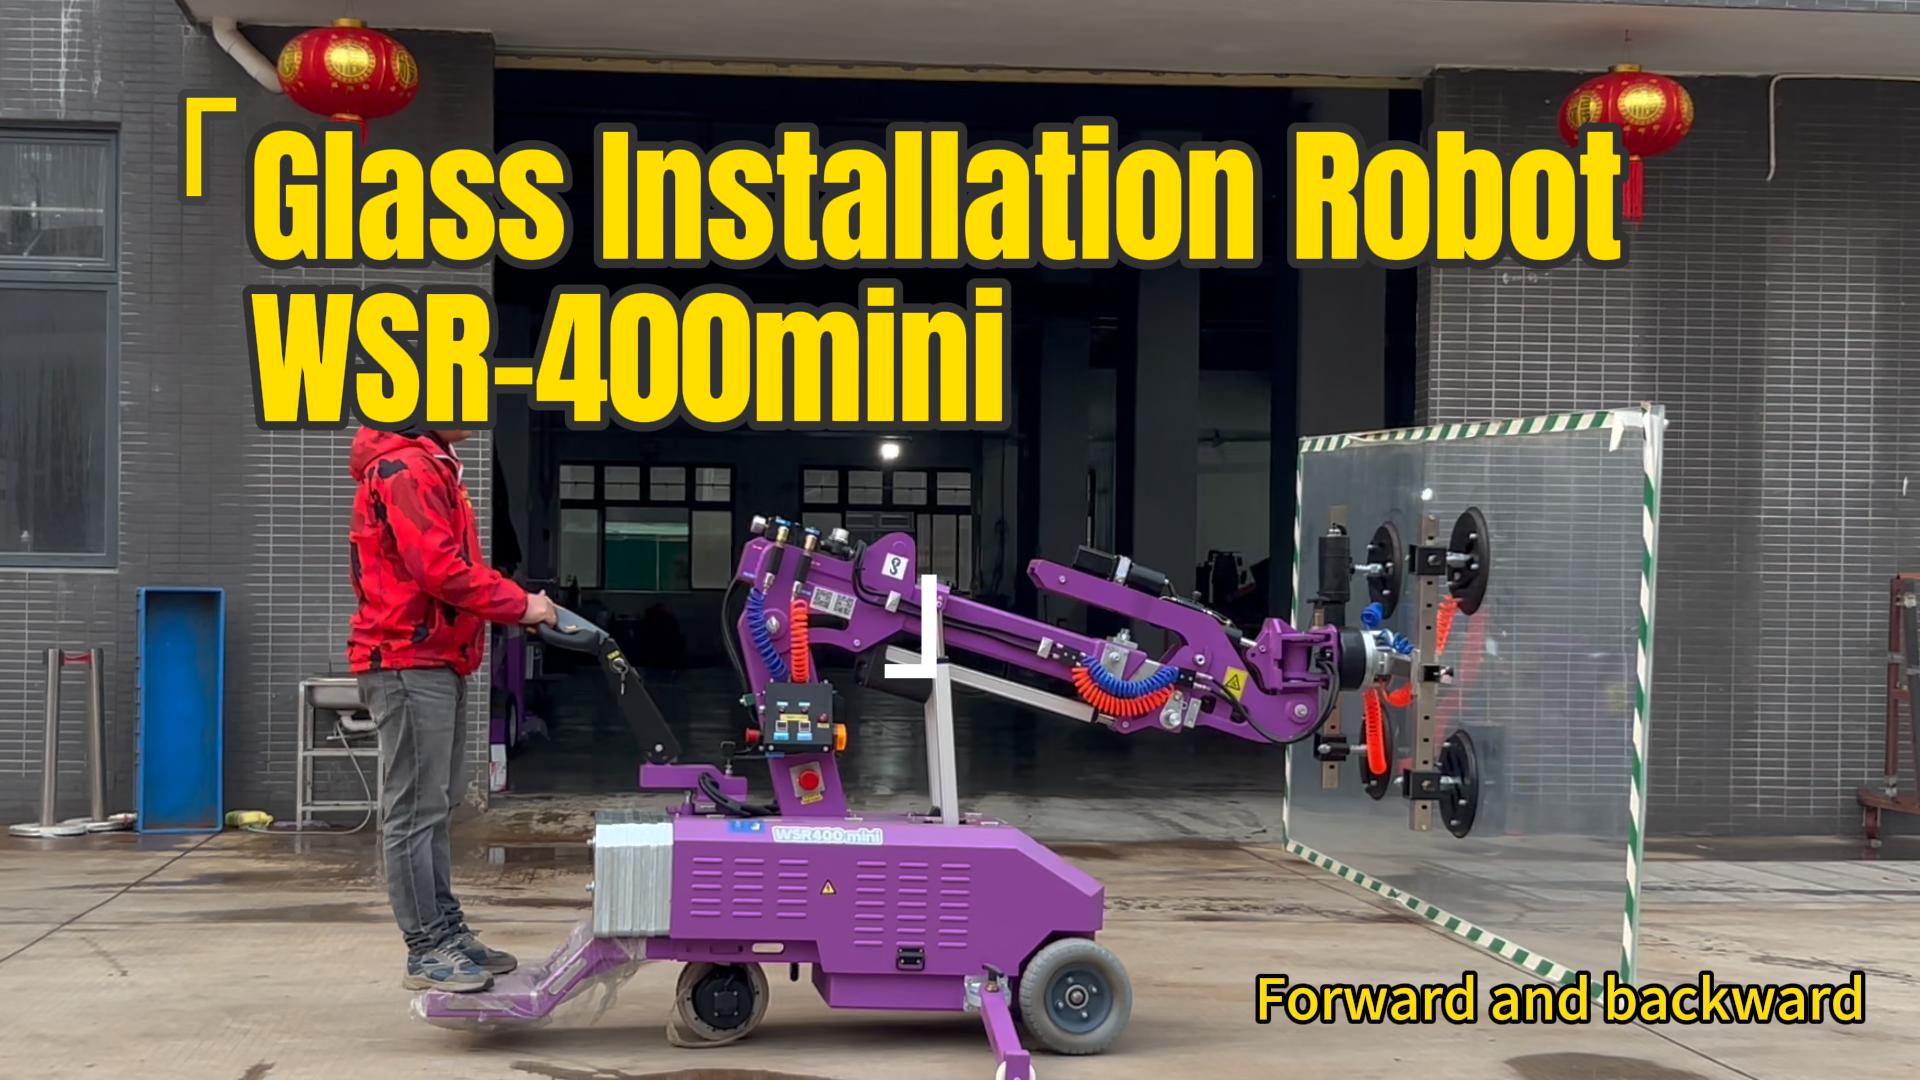 Glass installation robot WSR-400 MINI from Cowest